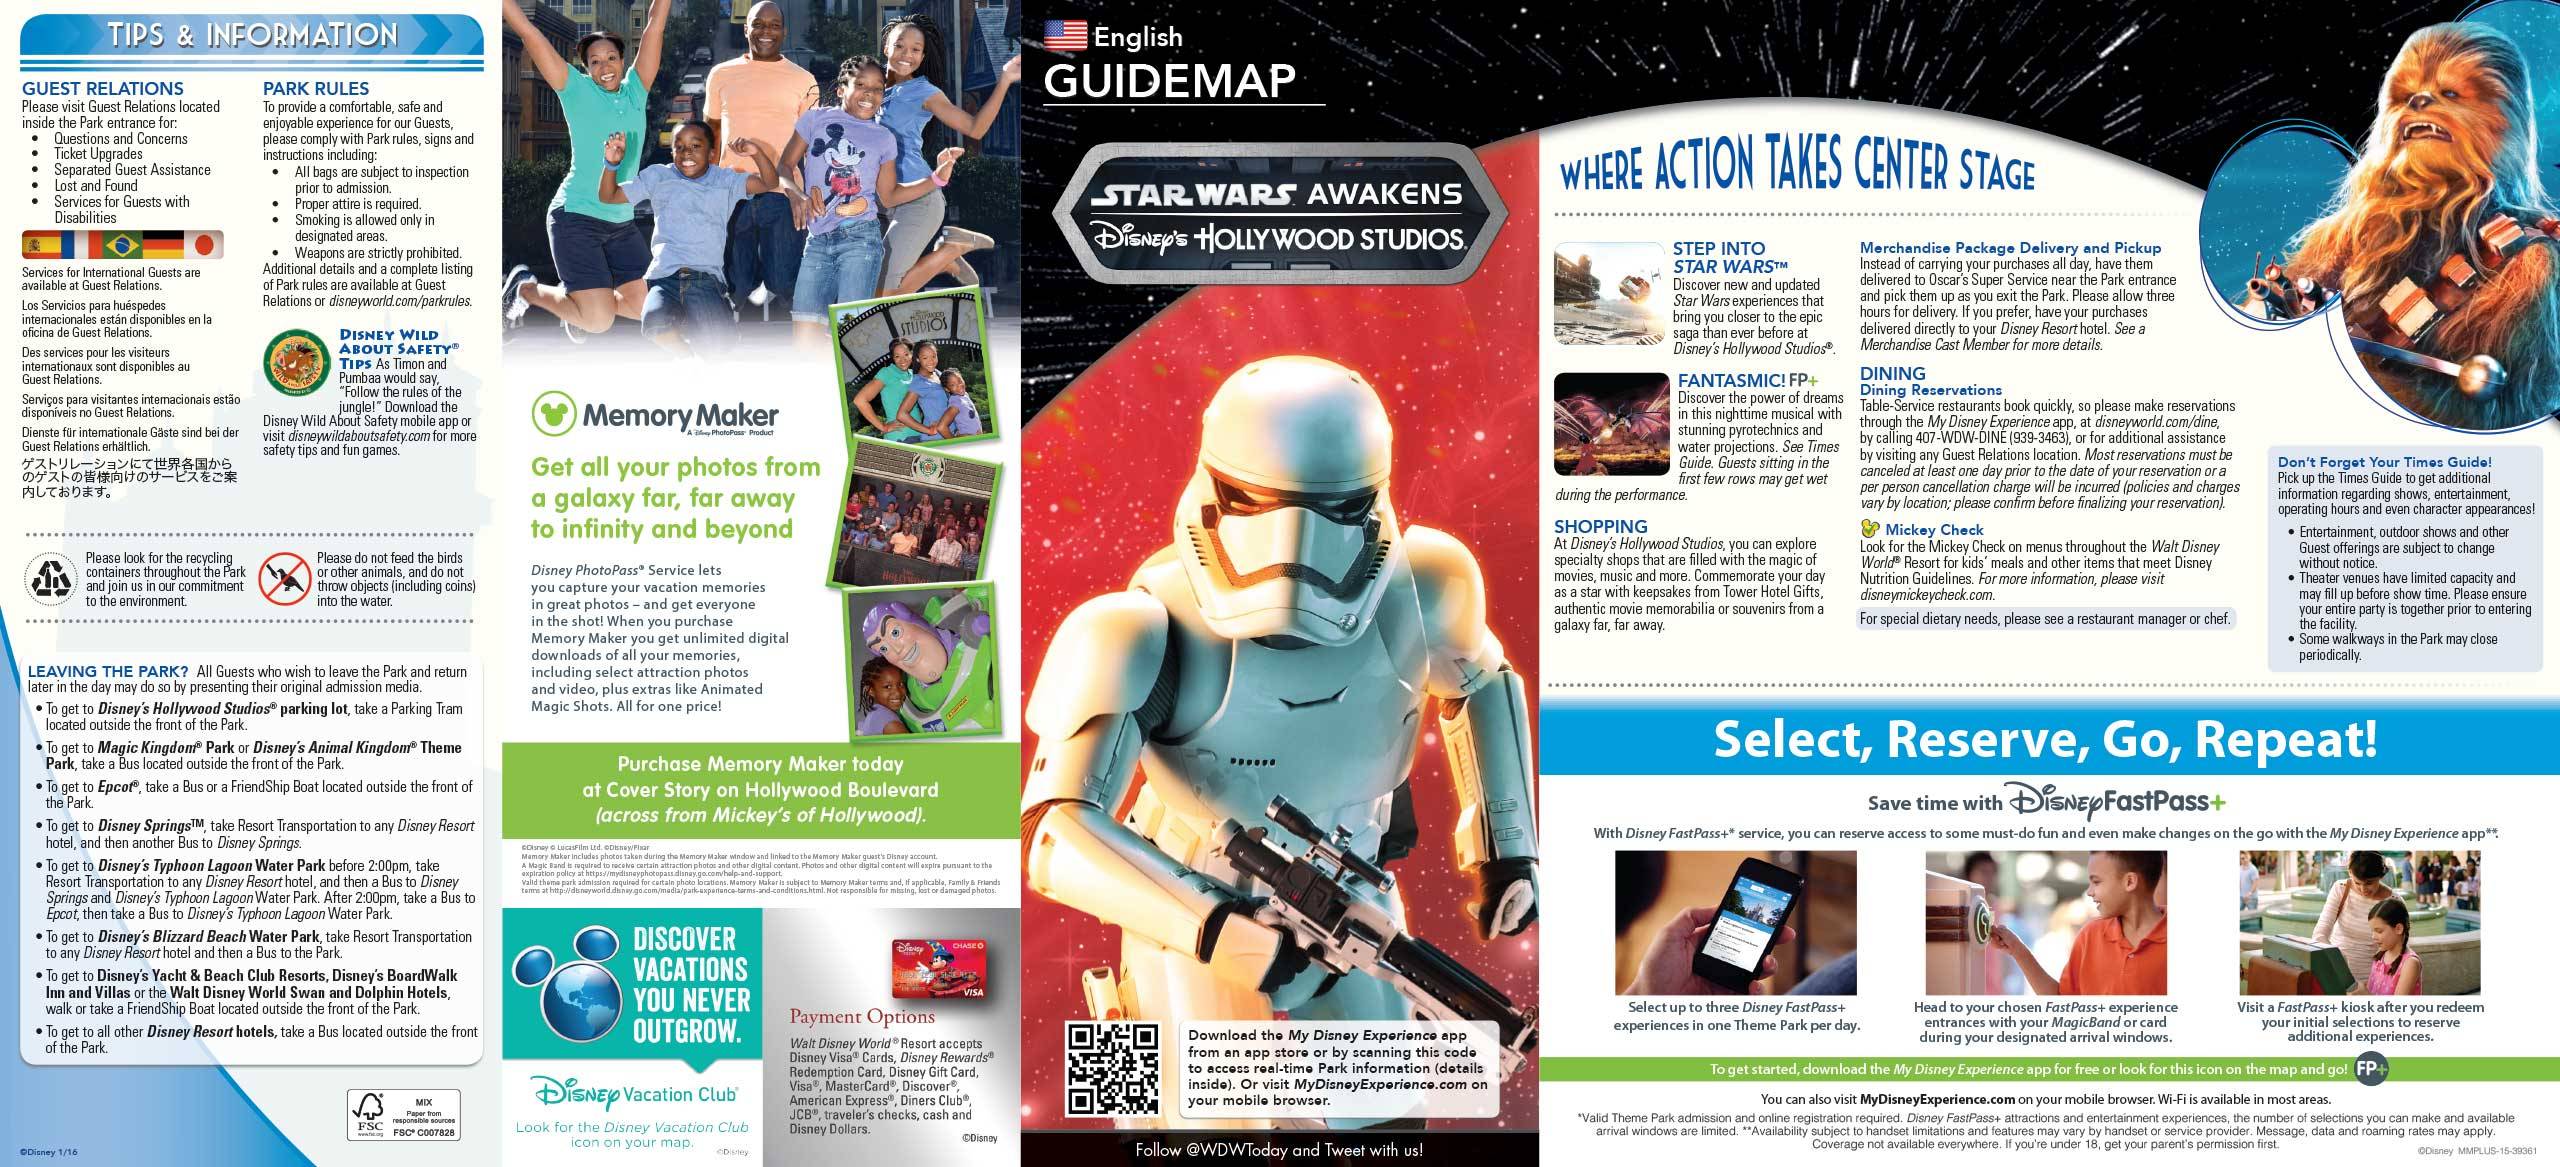 Disney's Hollywood Studios Guide Map January 2016 - Front